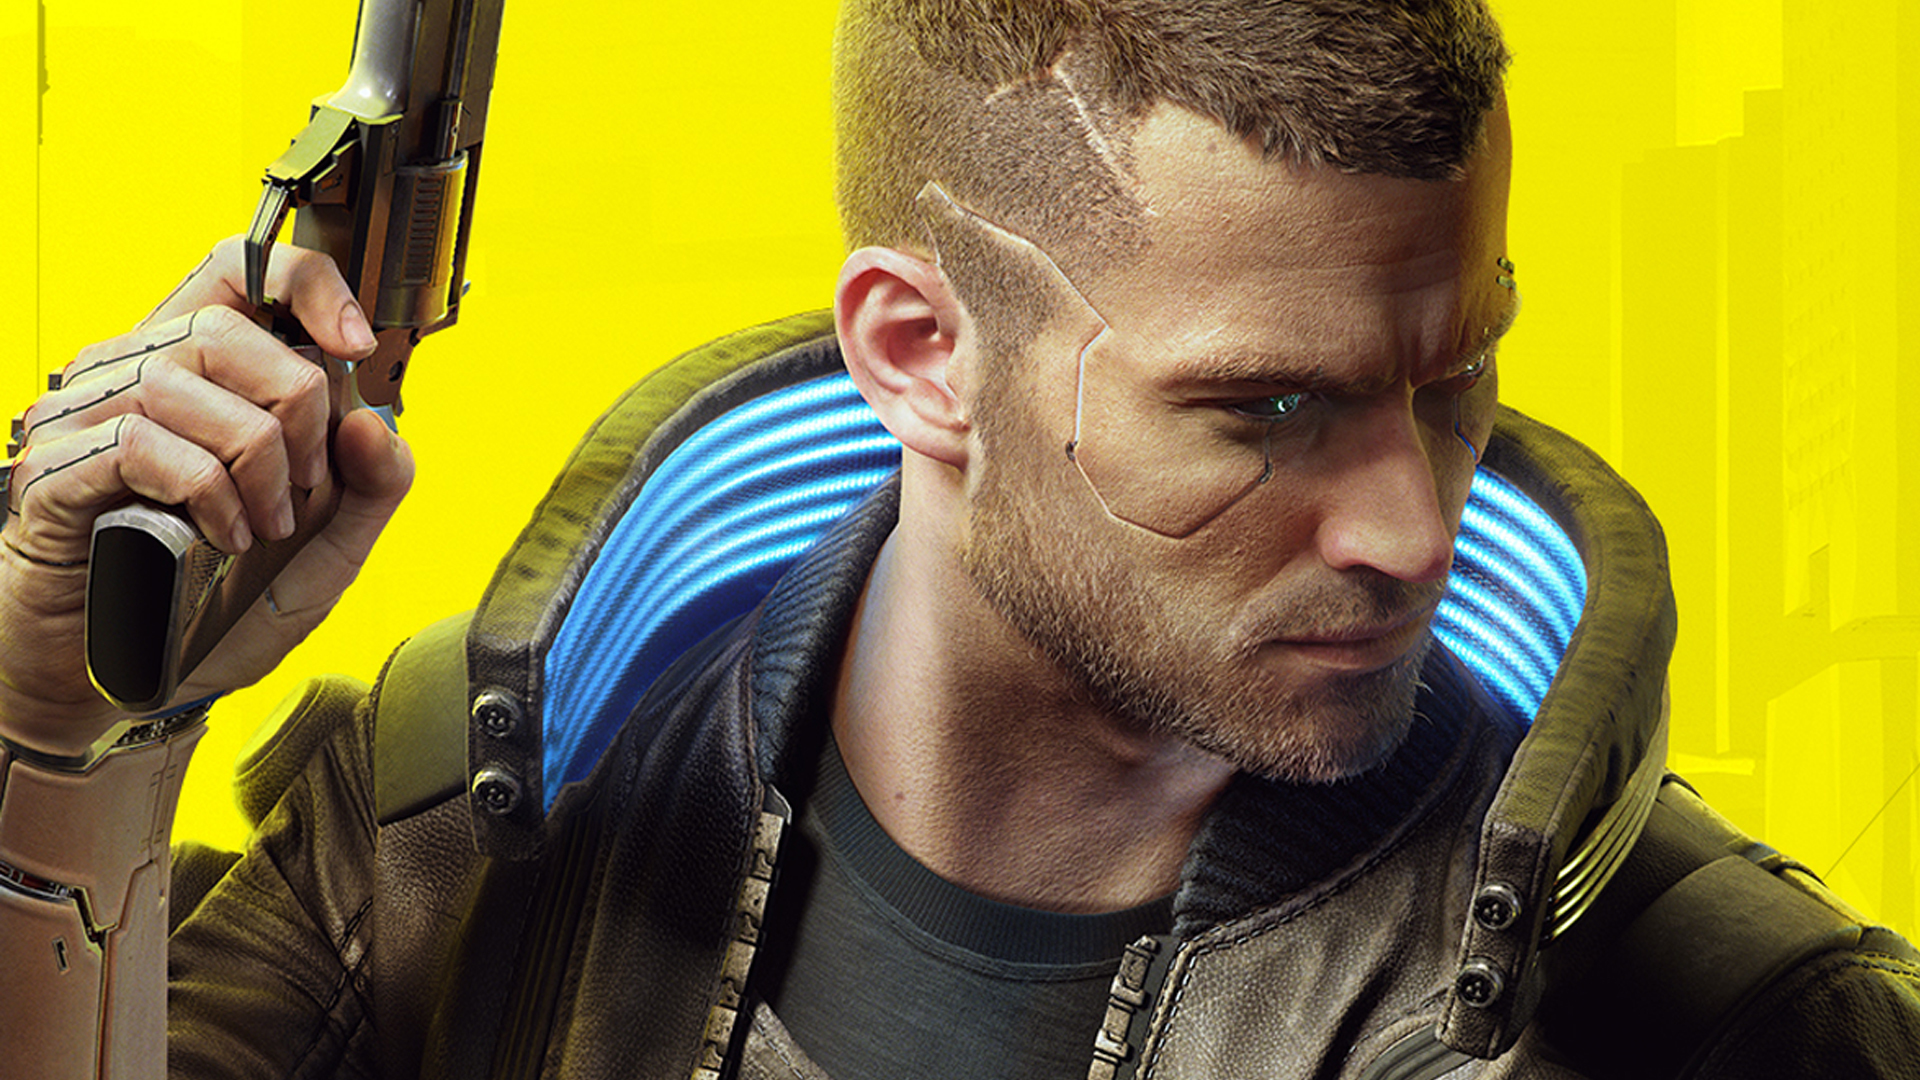 E3 2019: Cyberpunk 2077 - Everything We Know And Want To See At E3